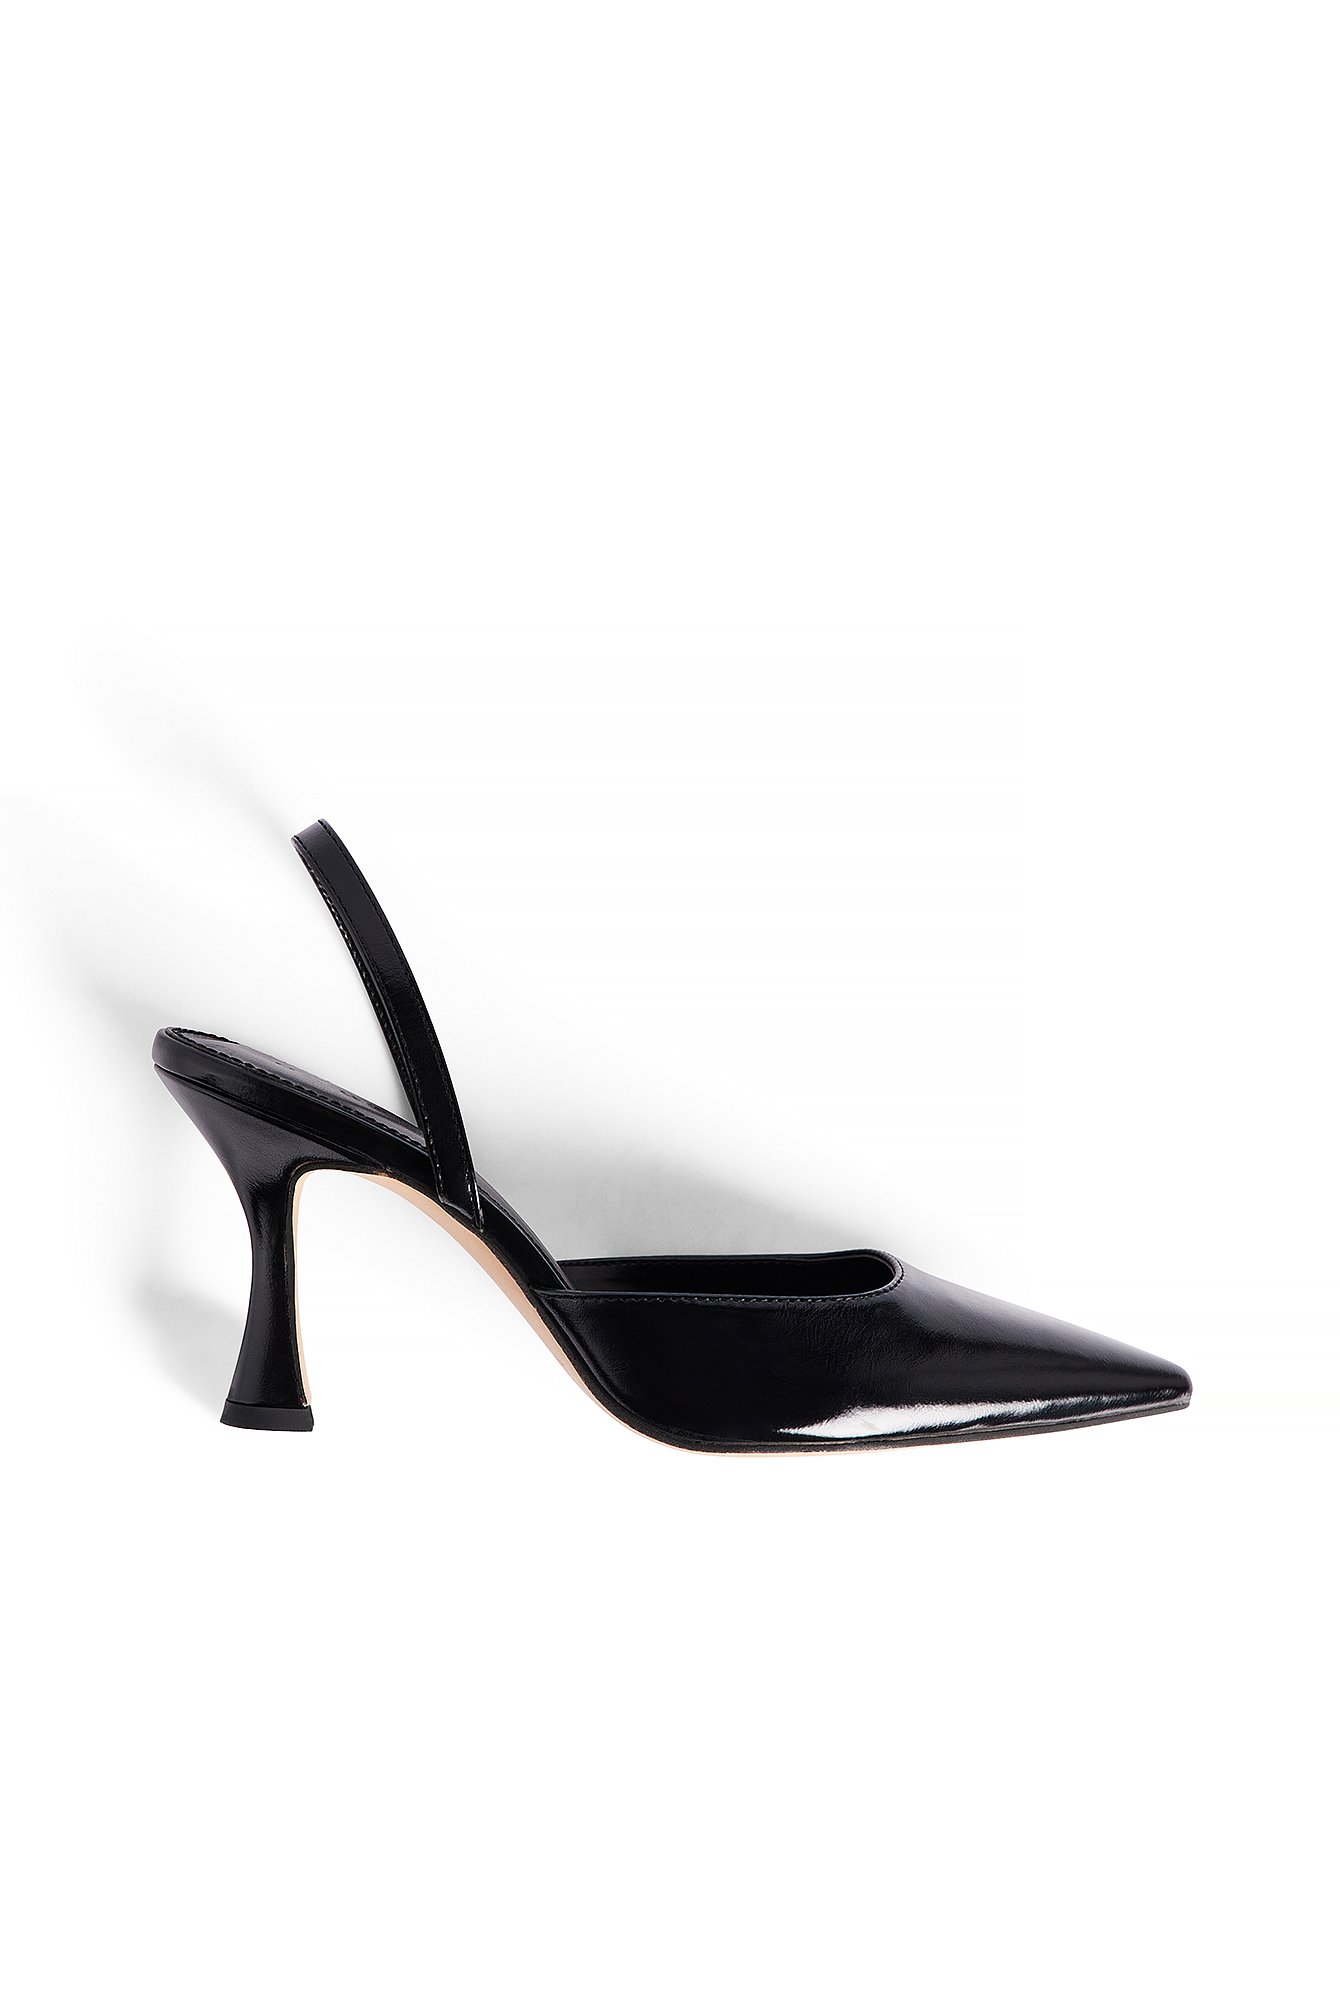 The Slingback Is Back - And These 30 Pairs Prove It